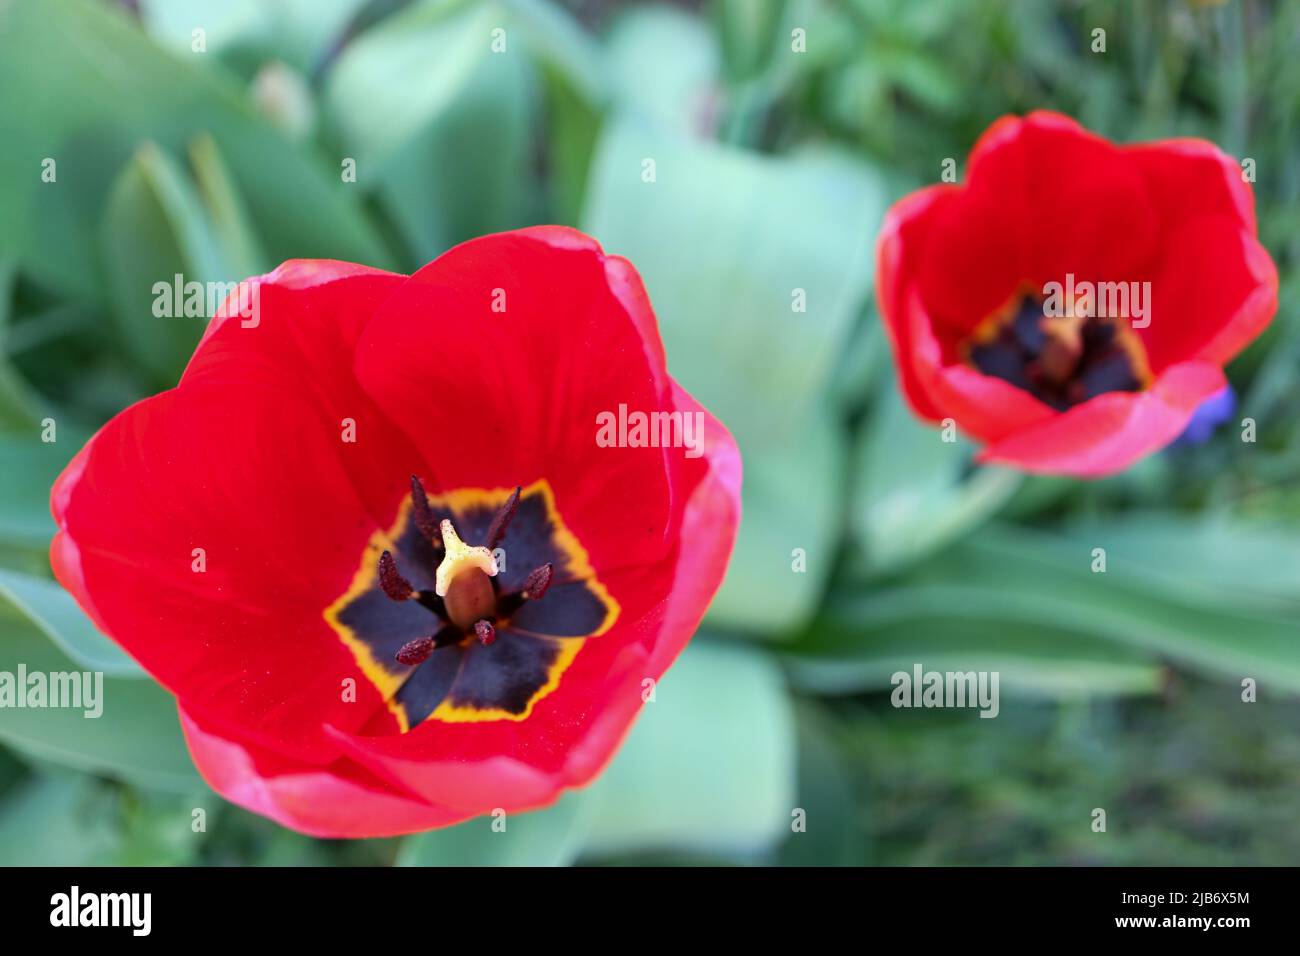 Red tulips with delicate petals and dark stamens, tulips with green leaves in the garden, spring flowers macro , beauty in nature, flower head, floral Stock Photo